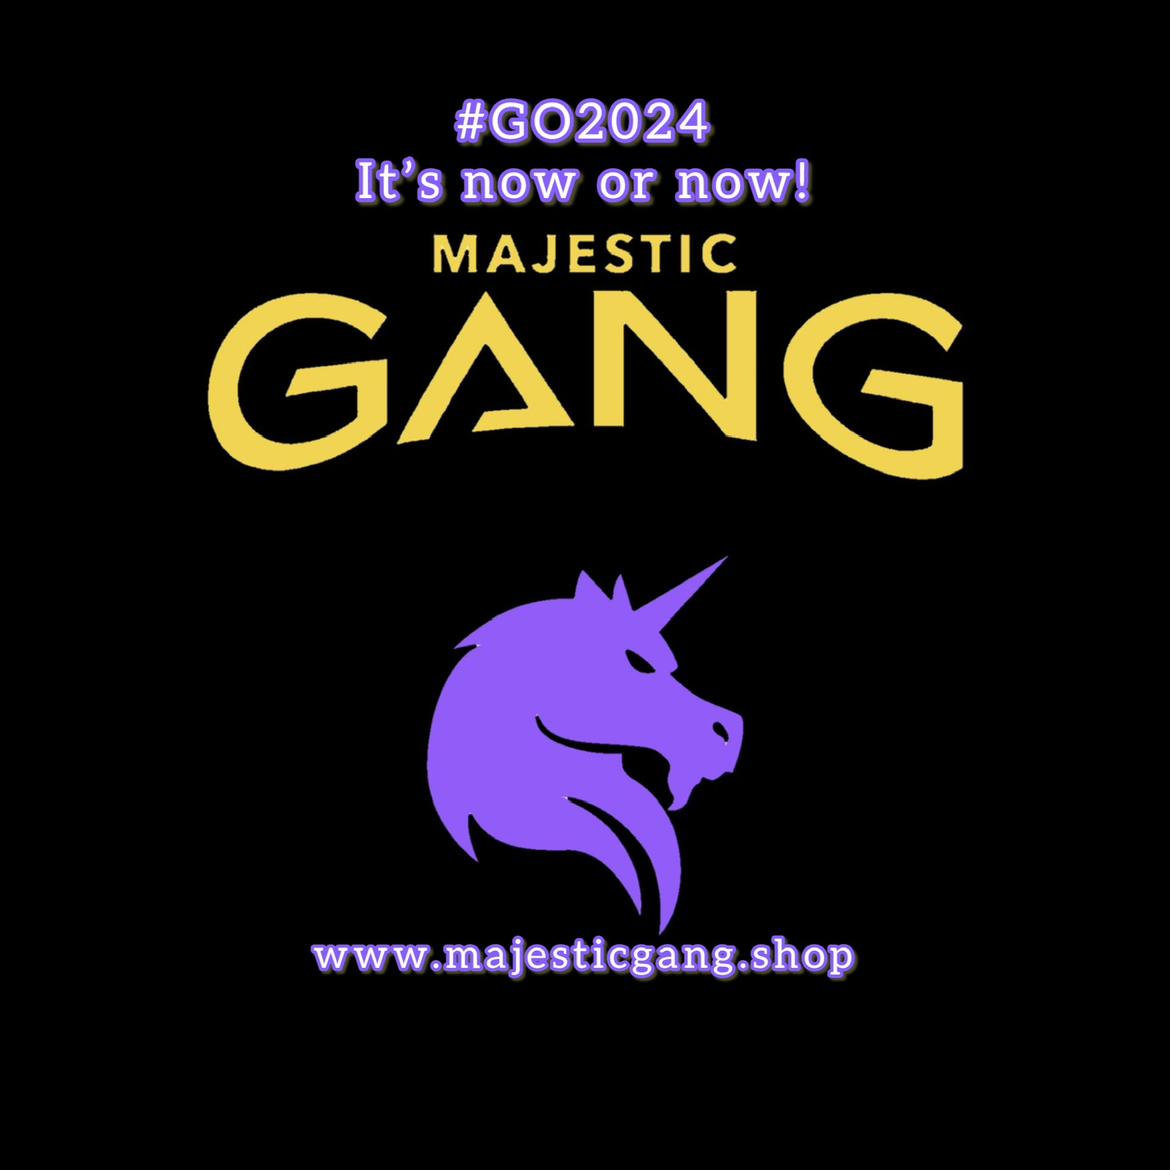 MajesticGang's images